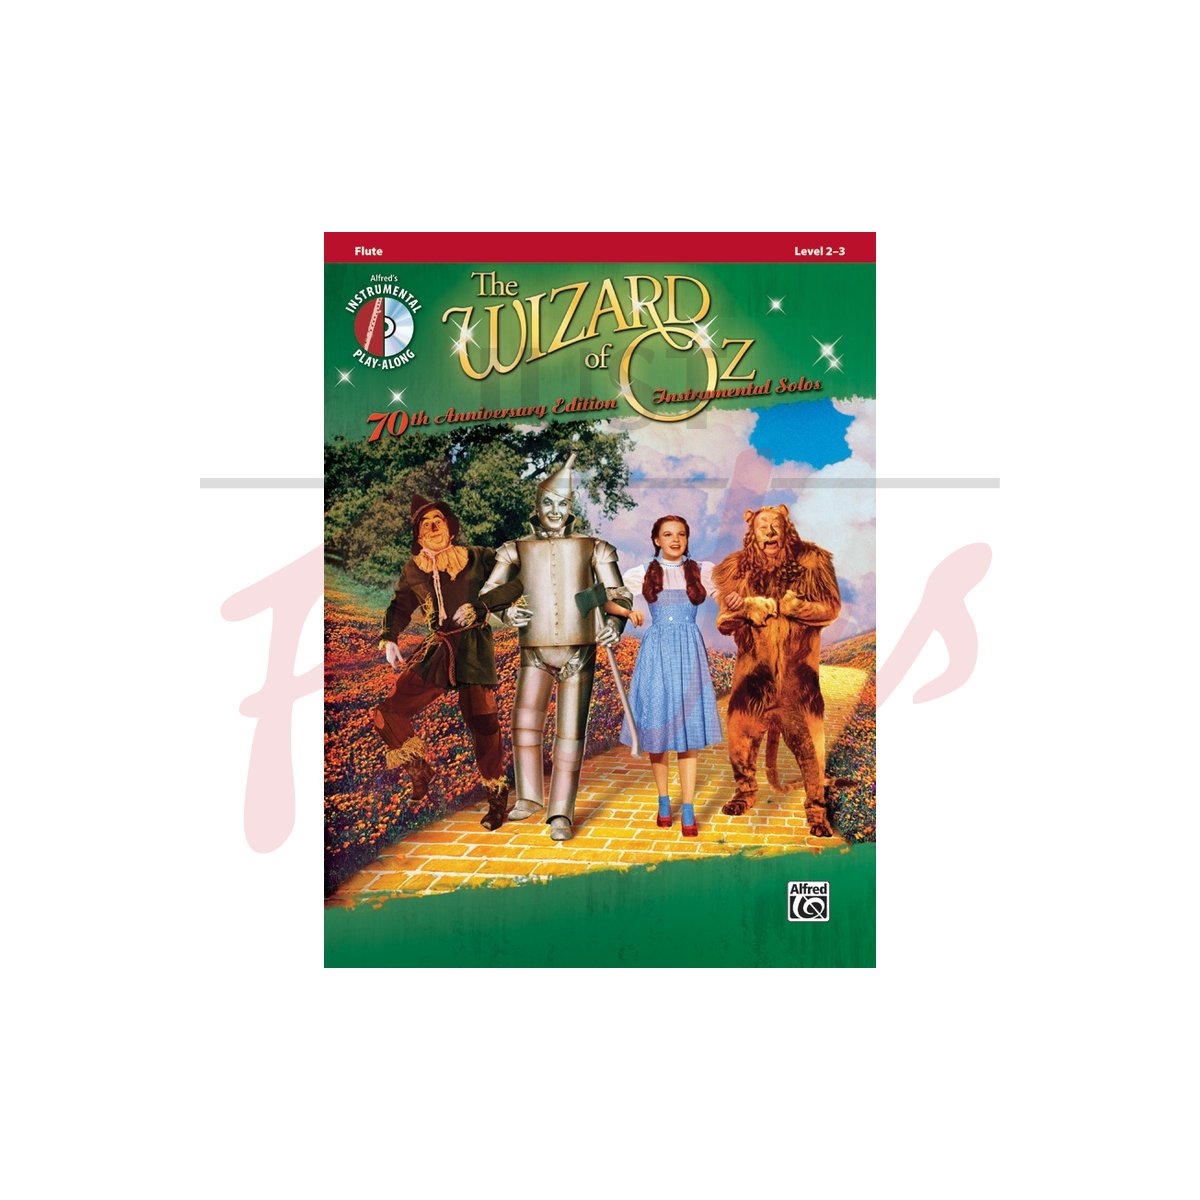 The Wizard of Oz - 70th Anniversary Edition [Flute]